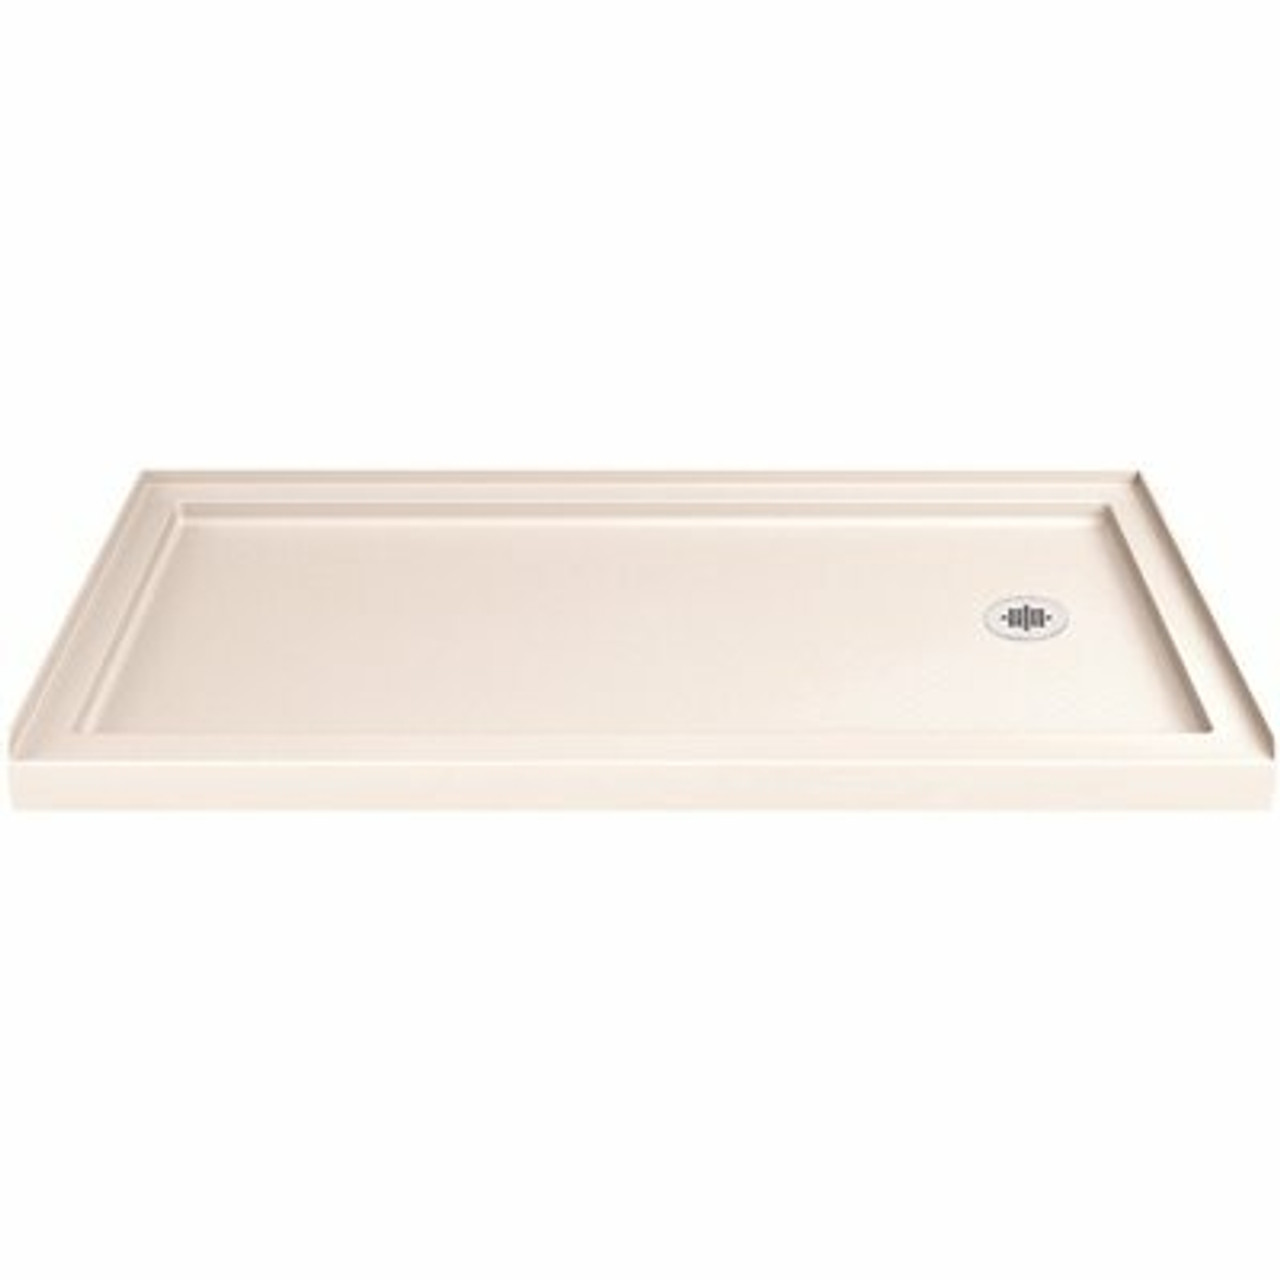 Dreamline Slimline 32 In. D X 60 In. W Single Threshold Shower Base In Biscuit With Right Hand Drain